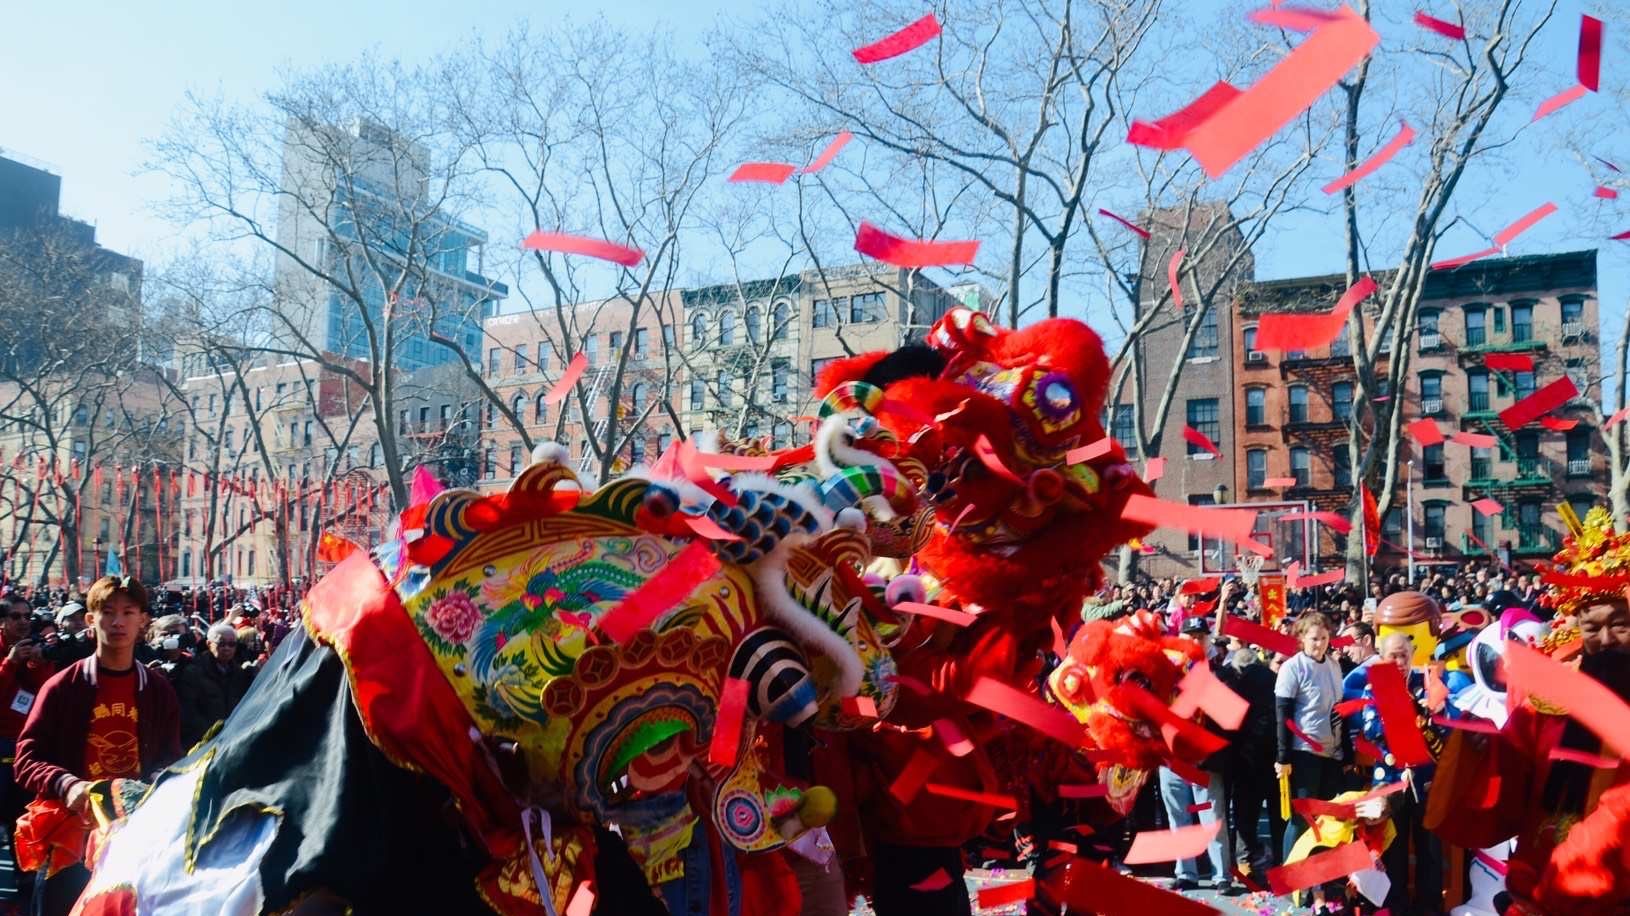 Lunar New Year: Celebrating the Year of the Dragon - Kupferberg Center for  the Arts